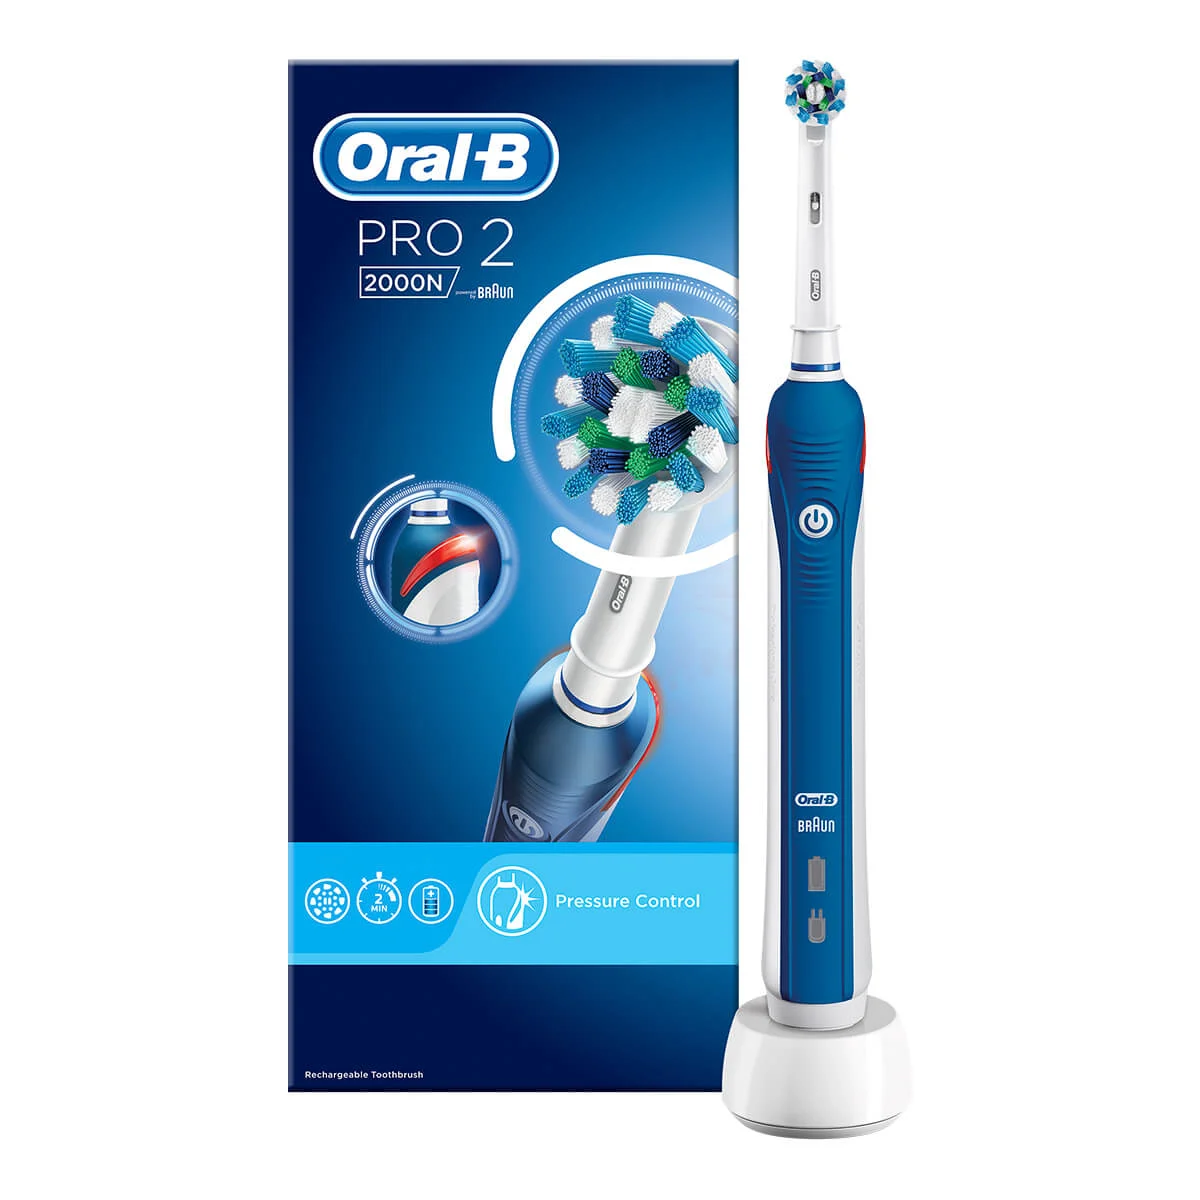 Oral-B Pro 2 2000N Electric Rechargeable Toothbrush undefined